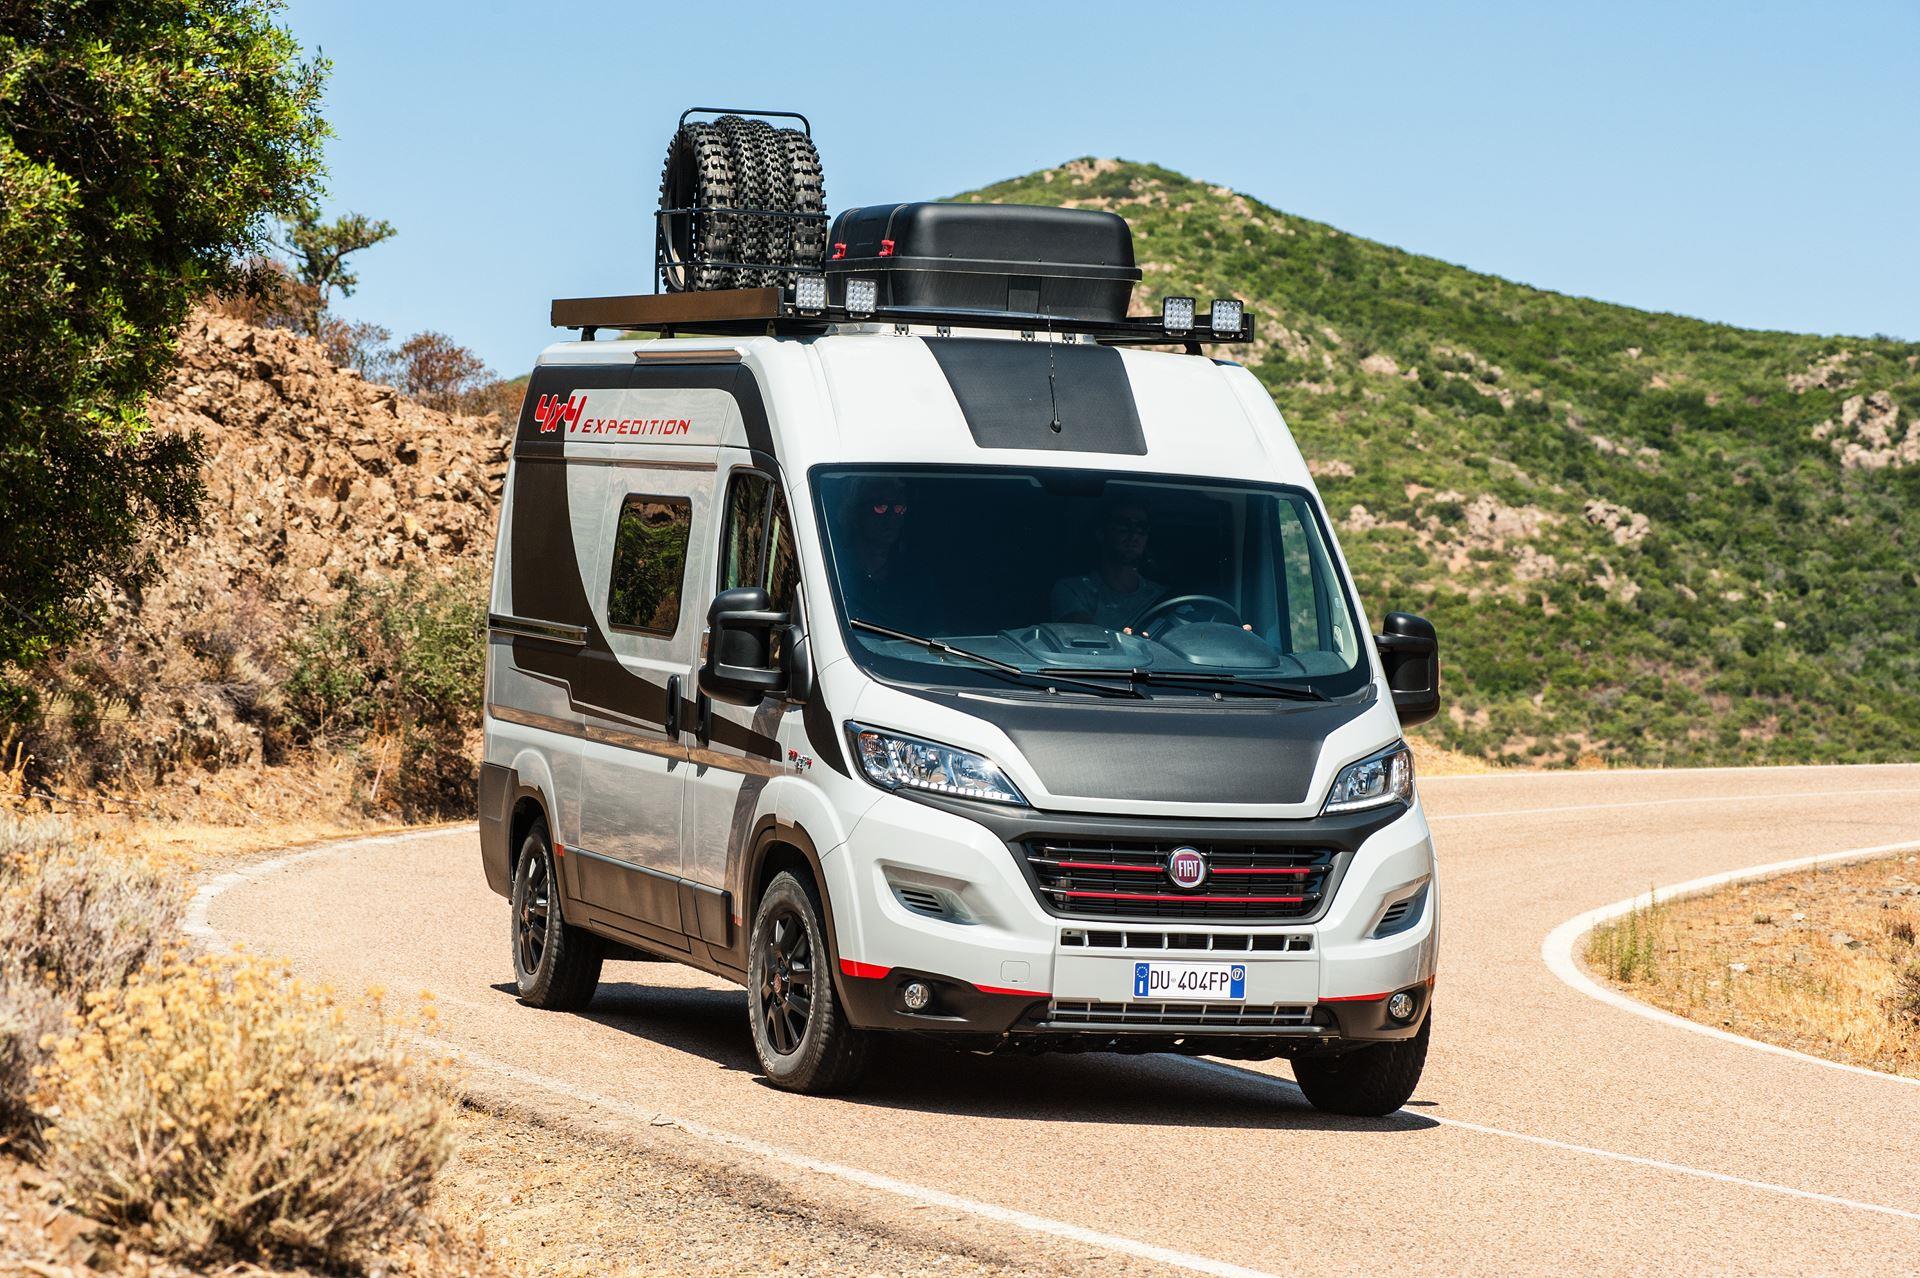 2017 Fiat Ducato 4x4 Expedition News 